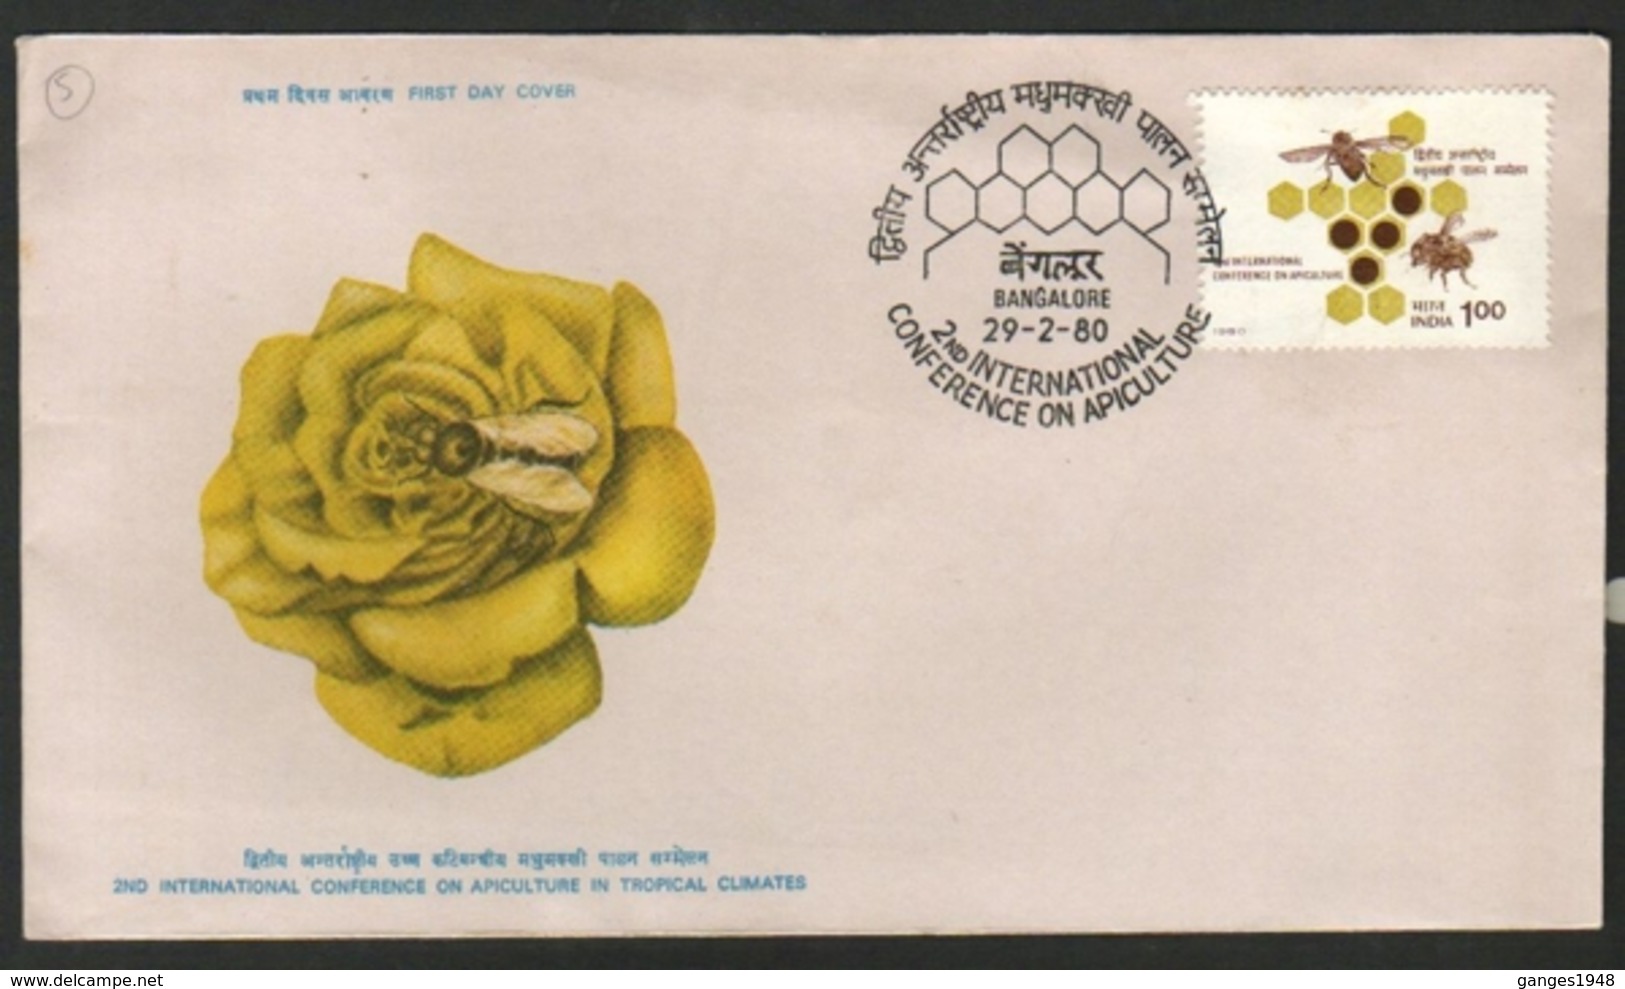 India  1980 Honeybees - 2nd Internation Conference On Apiculture  Bangalore  FD Cover  # 18861   D  Inde Indien - Bienen